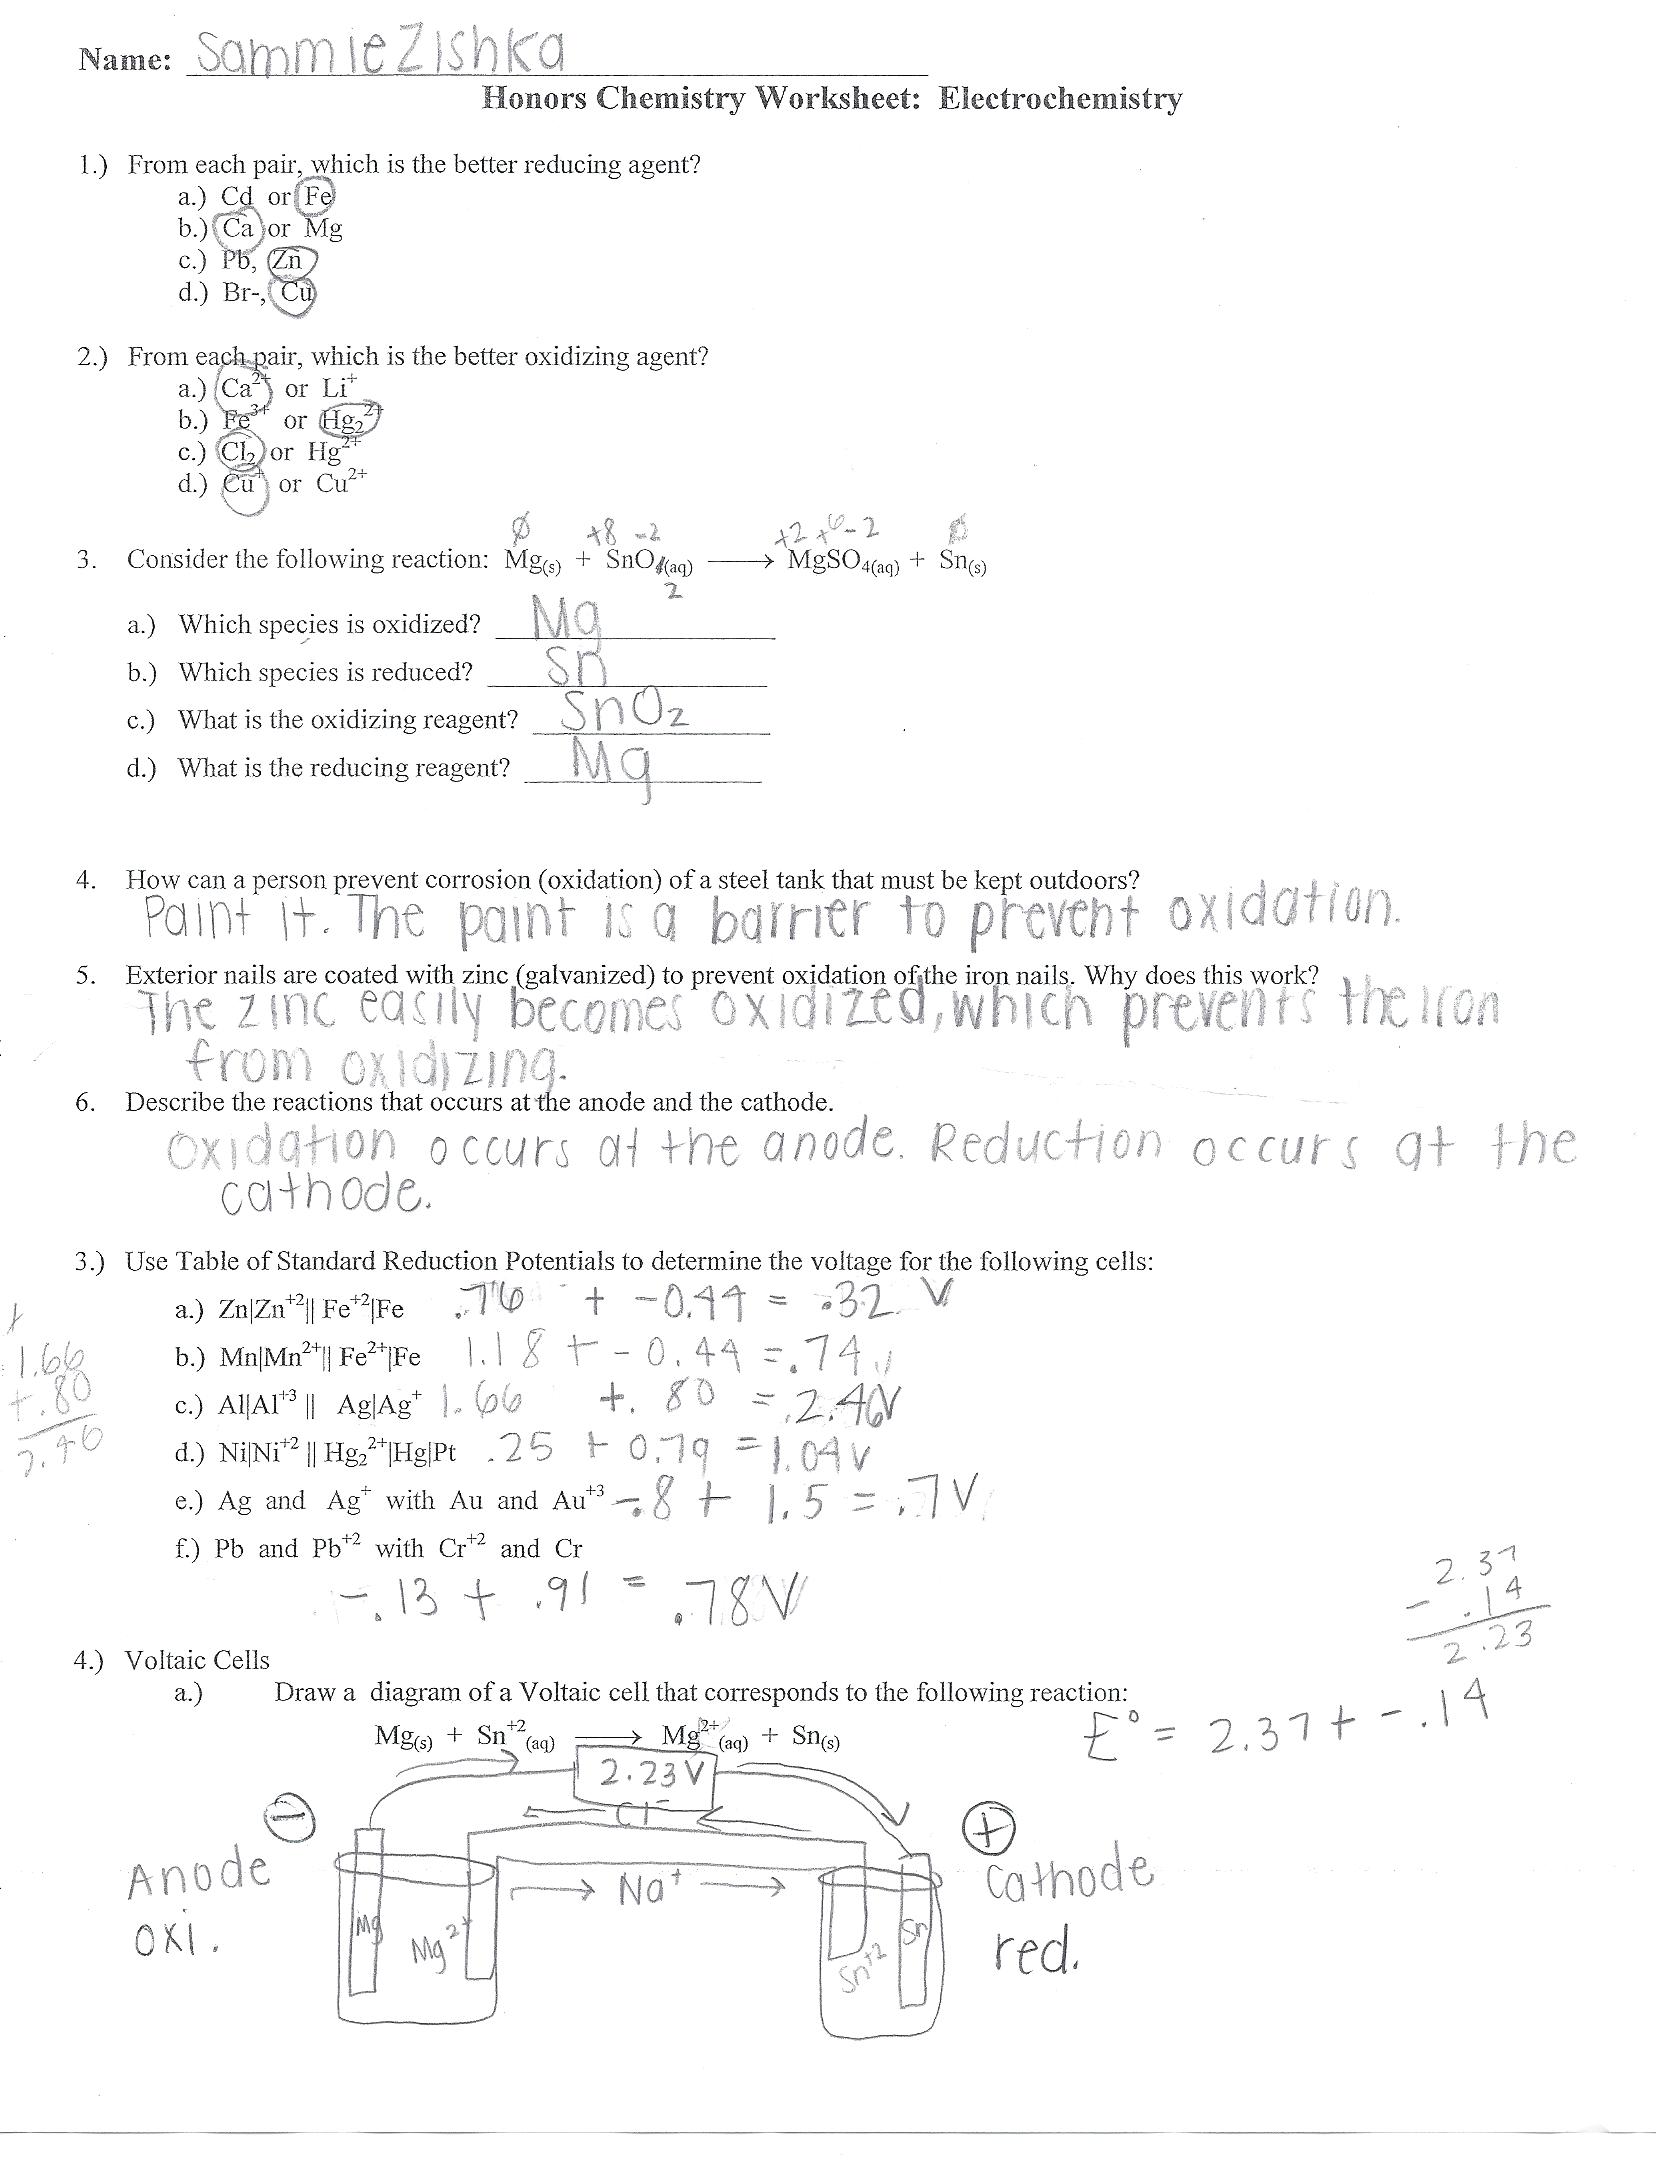 Potential and Kinetic Energy Worksheet Answer Key Image